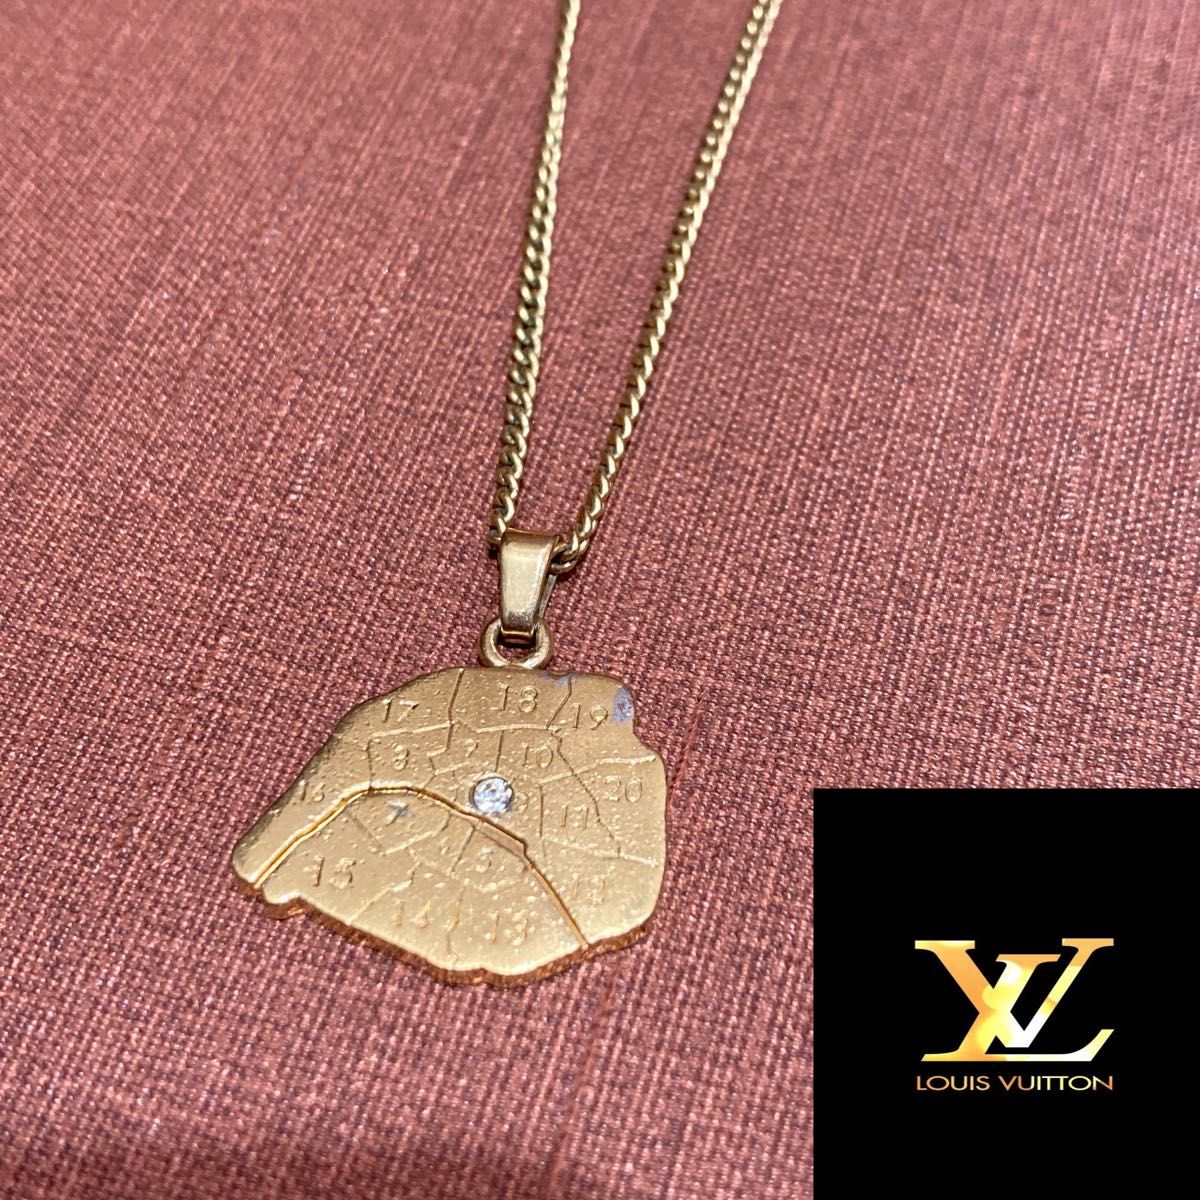 LV Chain Links Necklace S00 - Fashion Jewelry MP3065